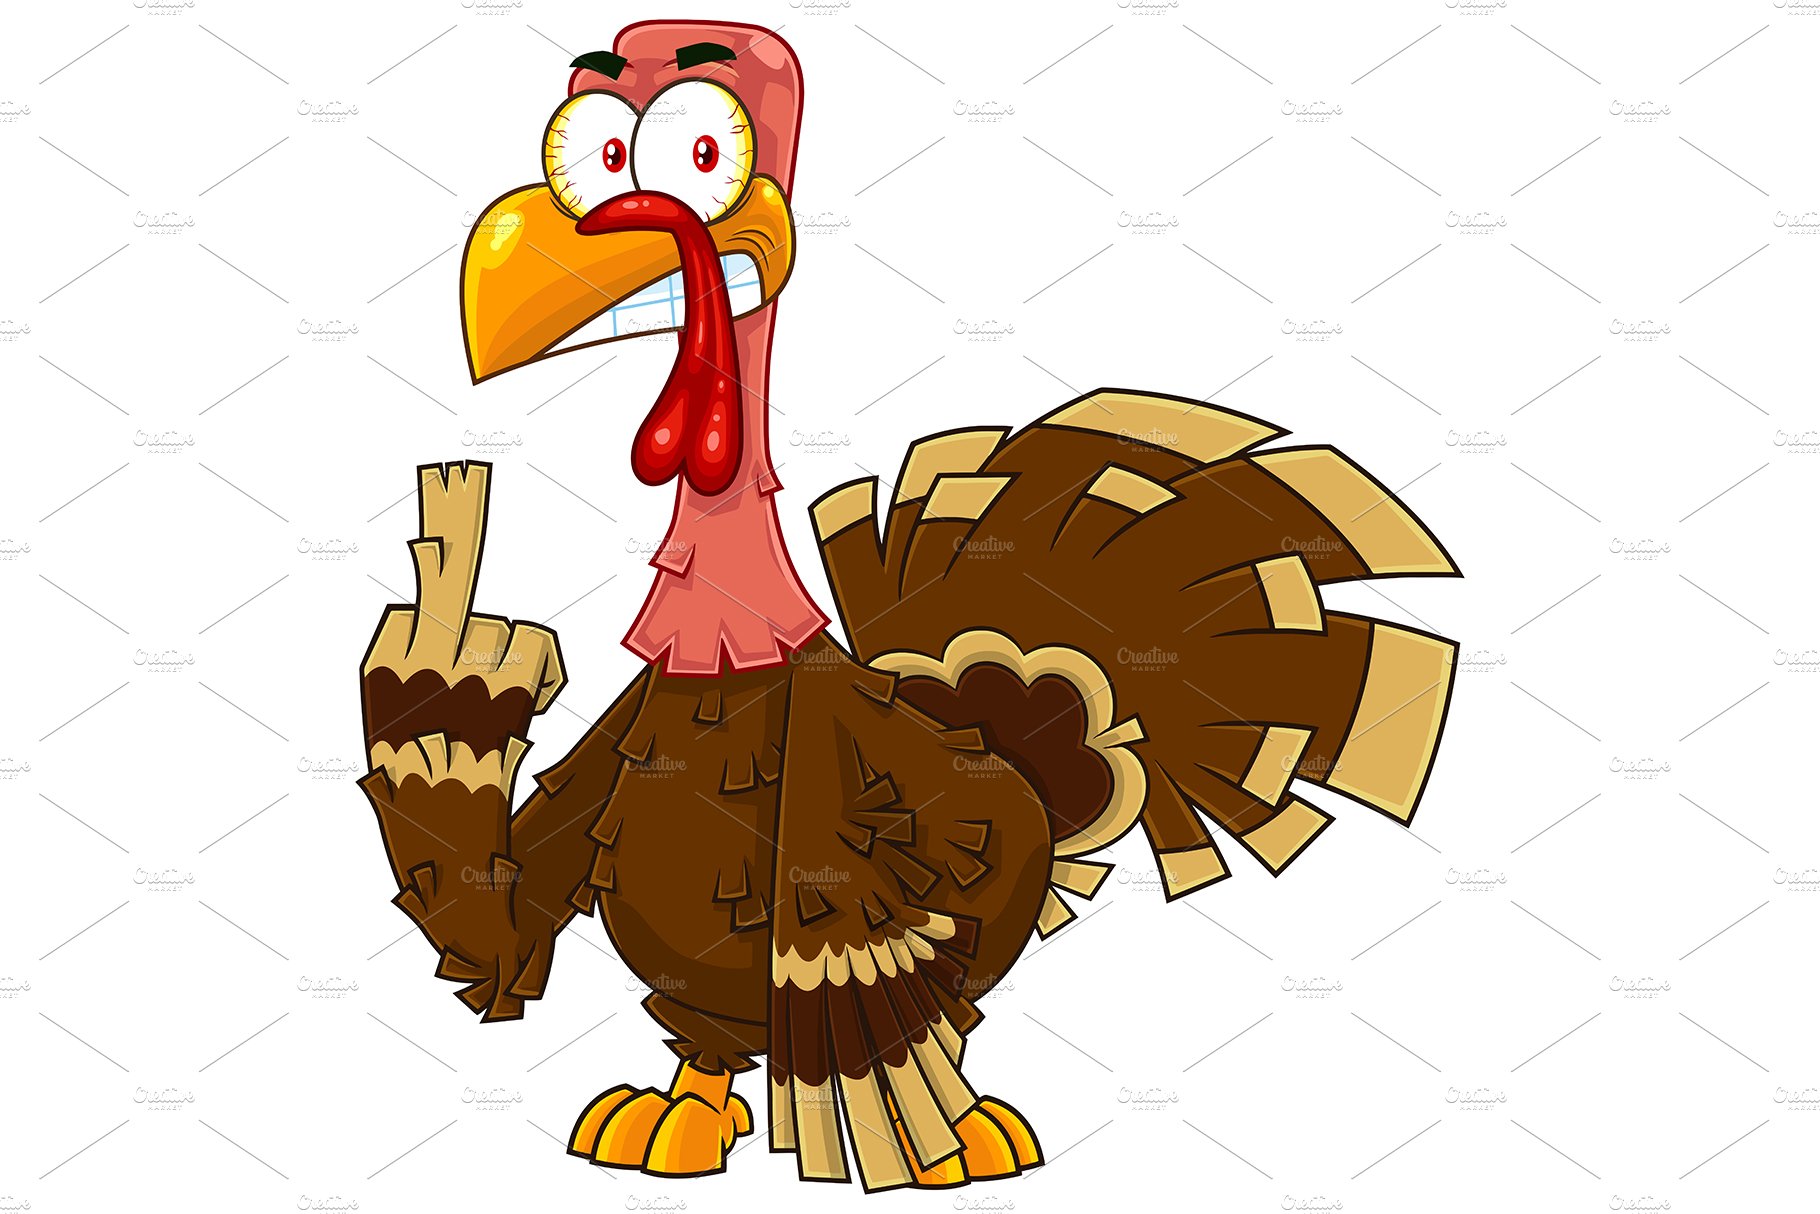 Angry Turkey Showing Middle Finger cover image.